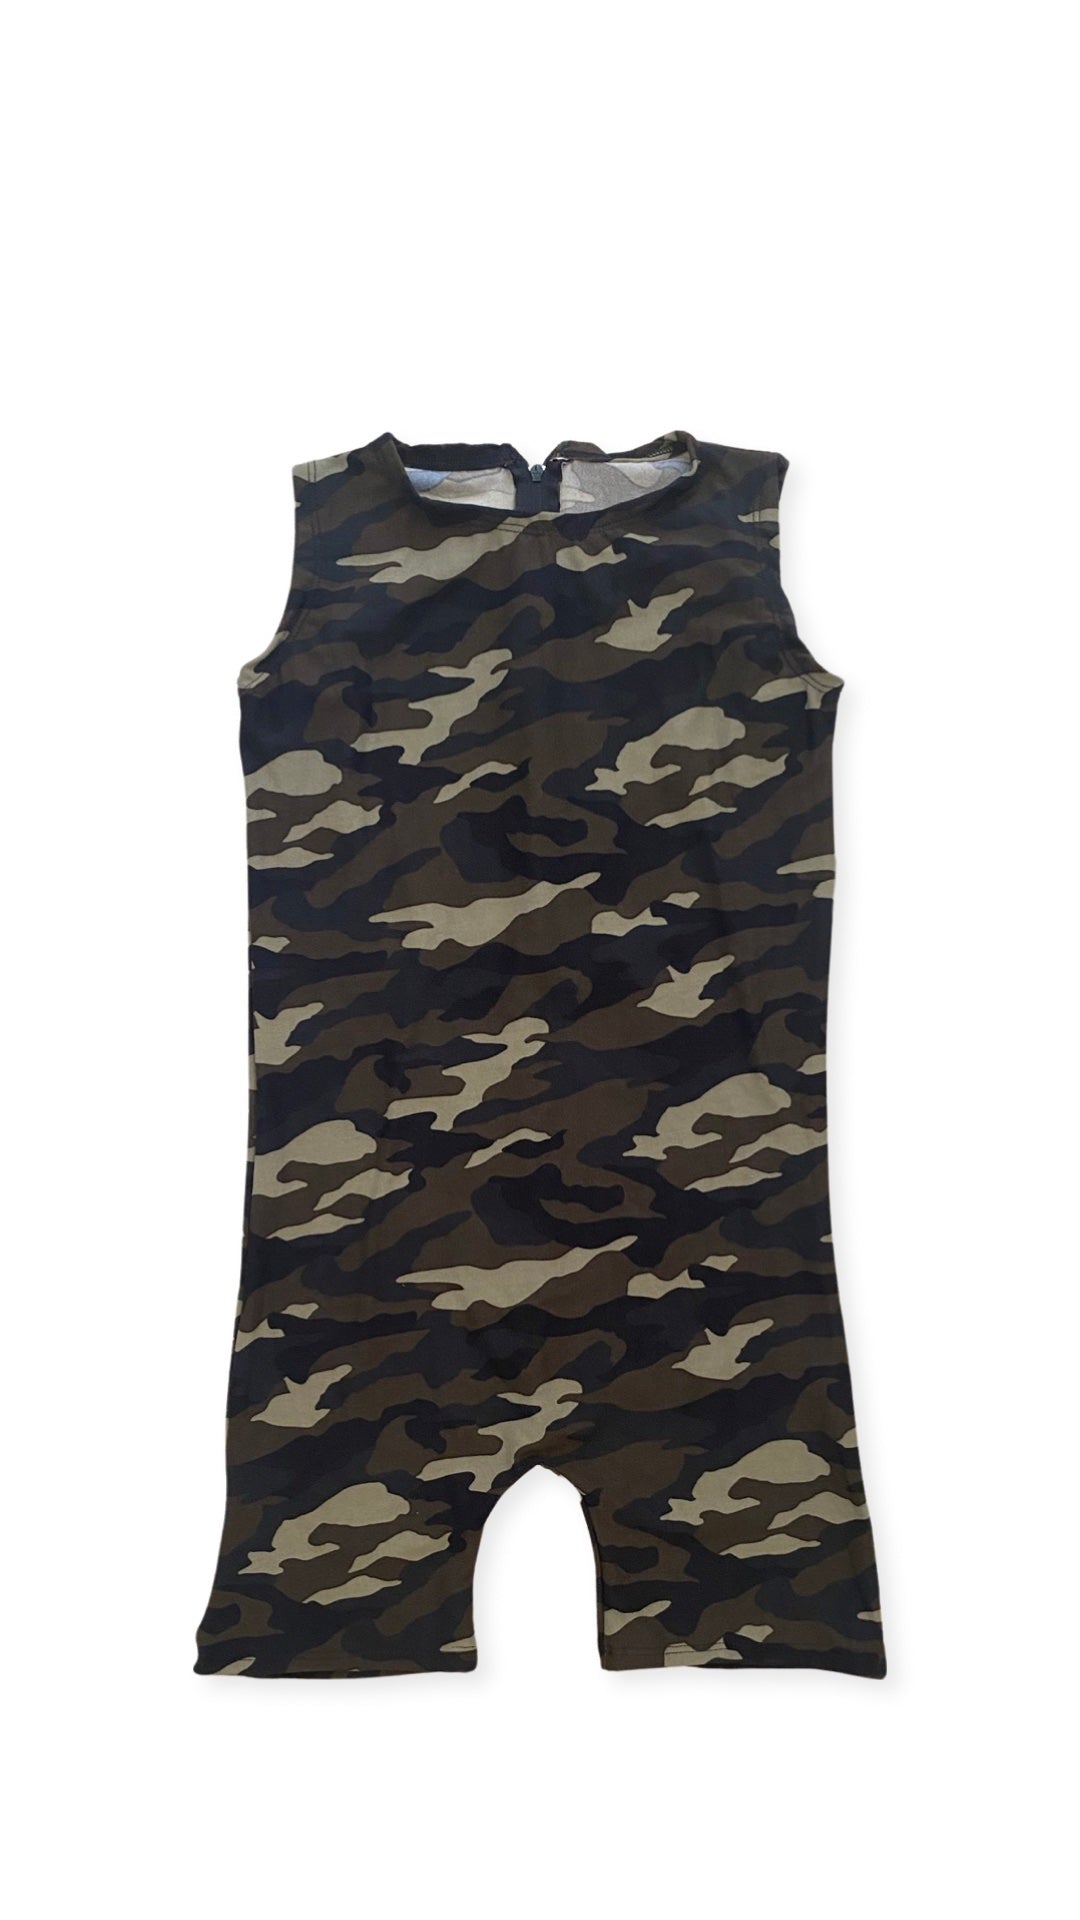 A baby's camo romper with a convenient zipper closure for easy dressing and undressing